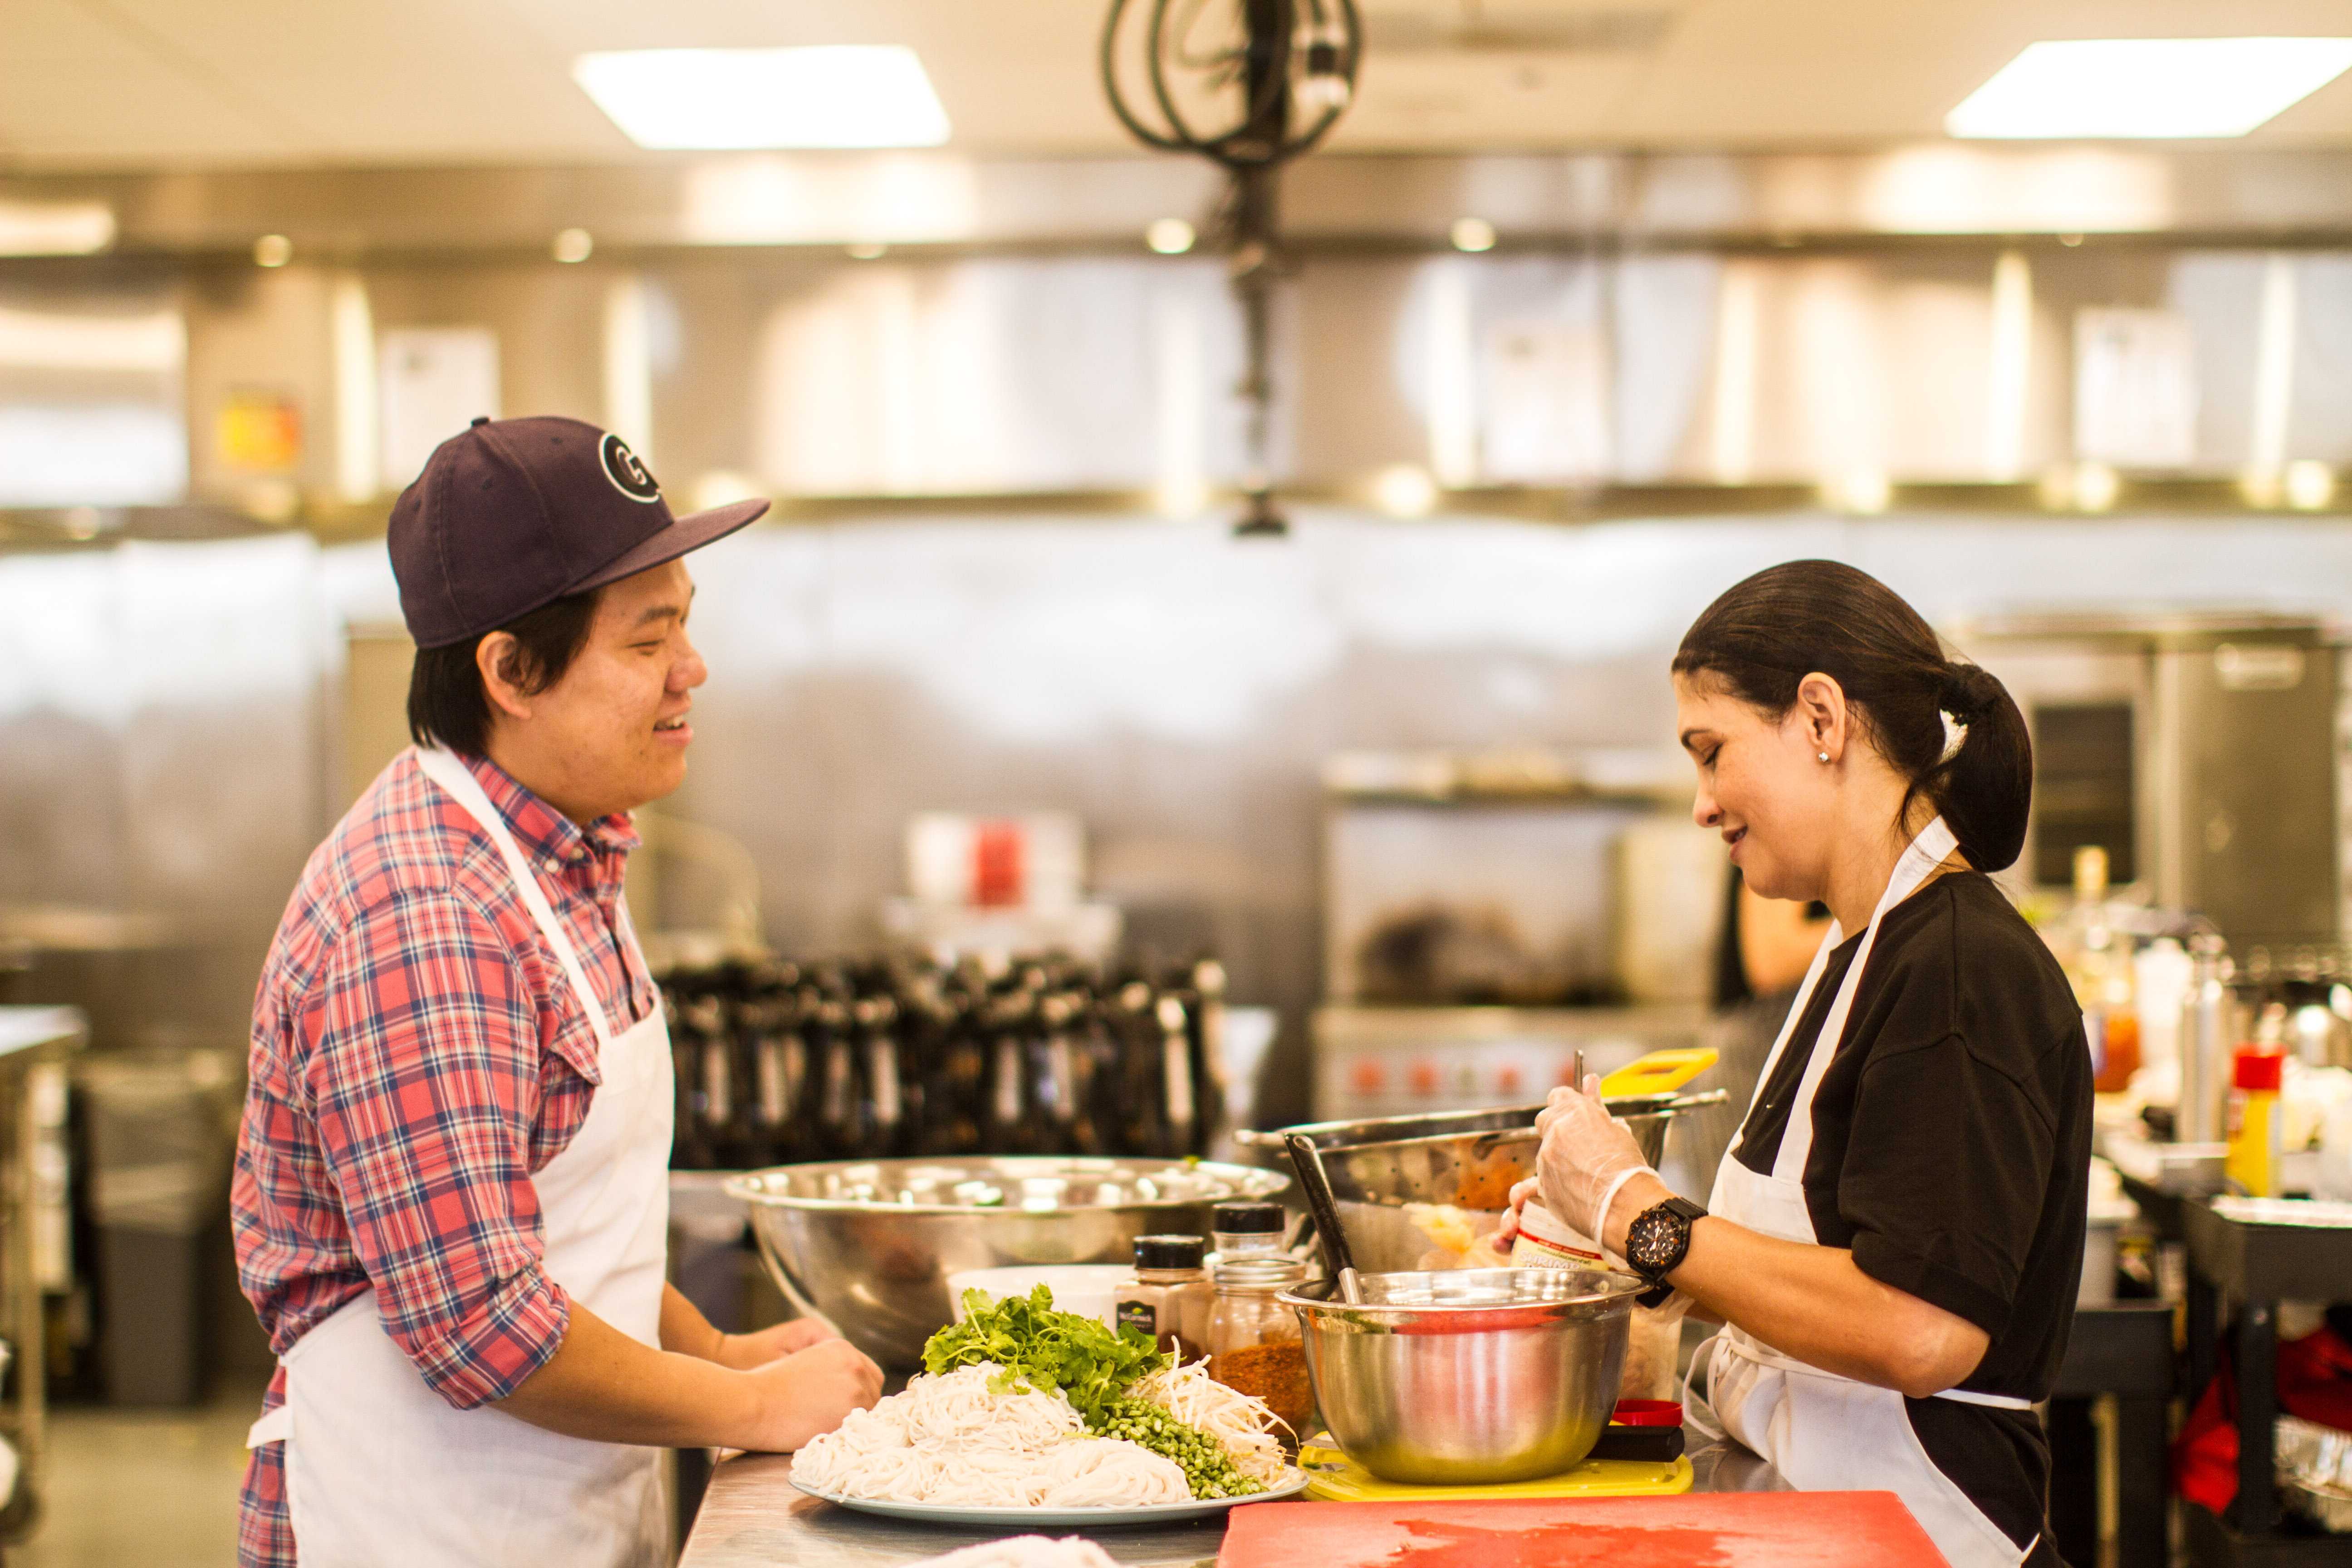 COURTESY FOODHINI Georgetown alumnus Noobtsaa Philip Vang launched Foodhini this week as a startup dedicated to helping immigrant chefs connect with customers seeking ethnic dishes. 